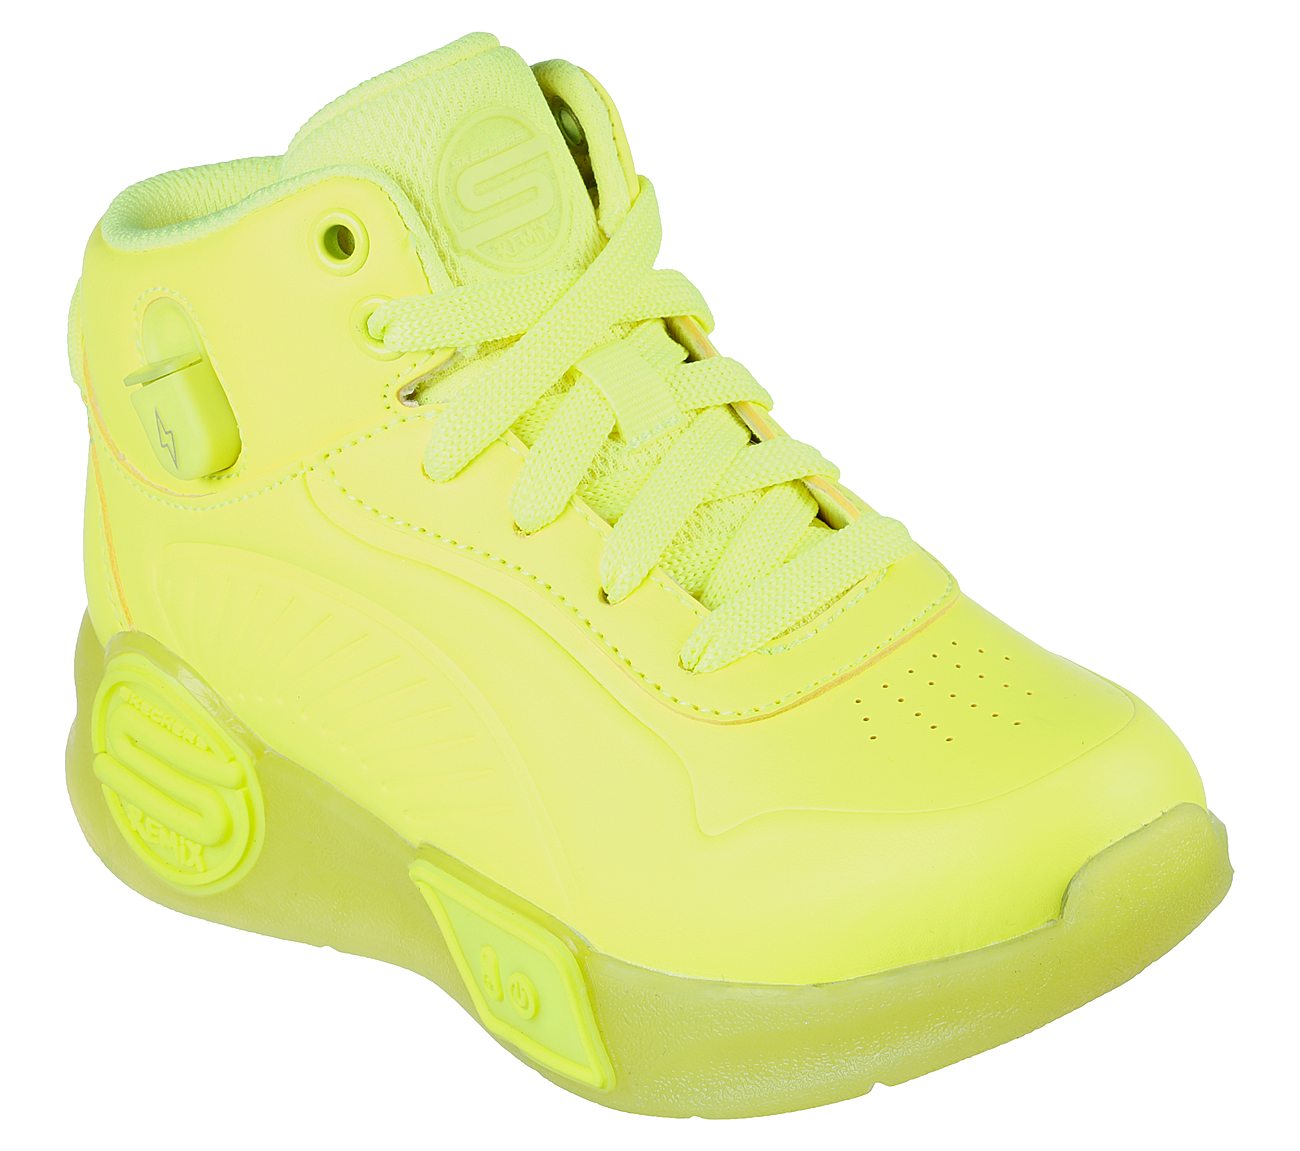 S-LIGHTS REMIX, NEON/YELLOW Footwear Right View